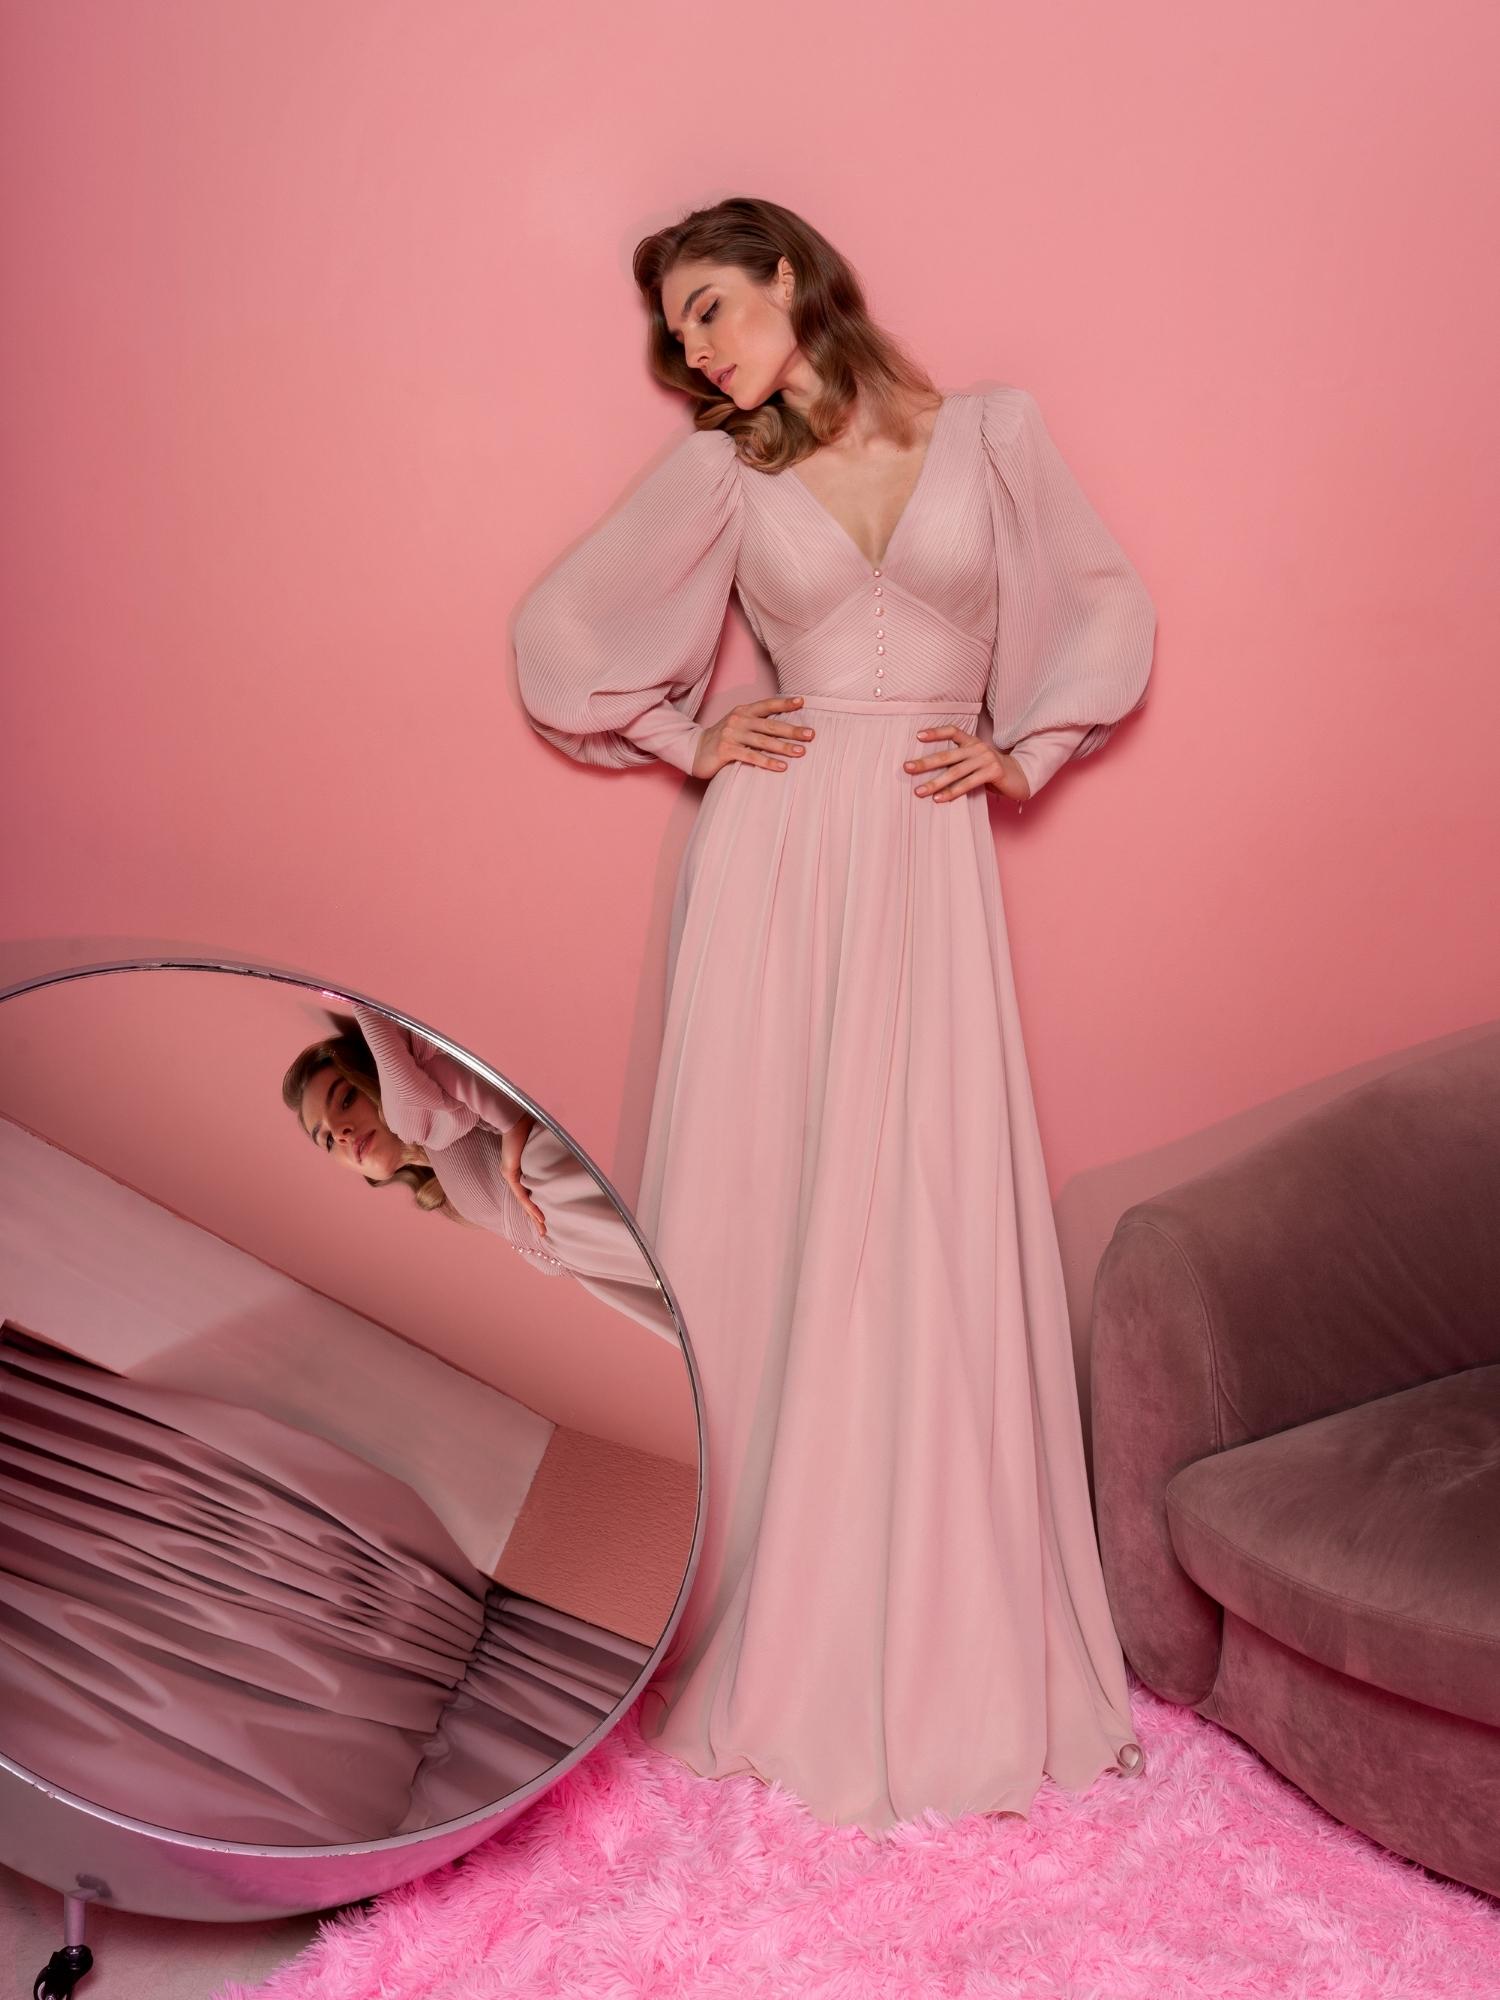 V-neck chiffon evening gown with long bishop sleeves